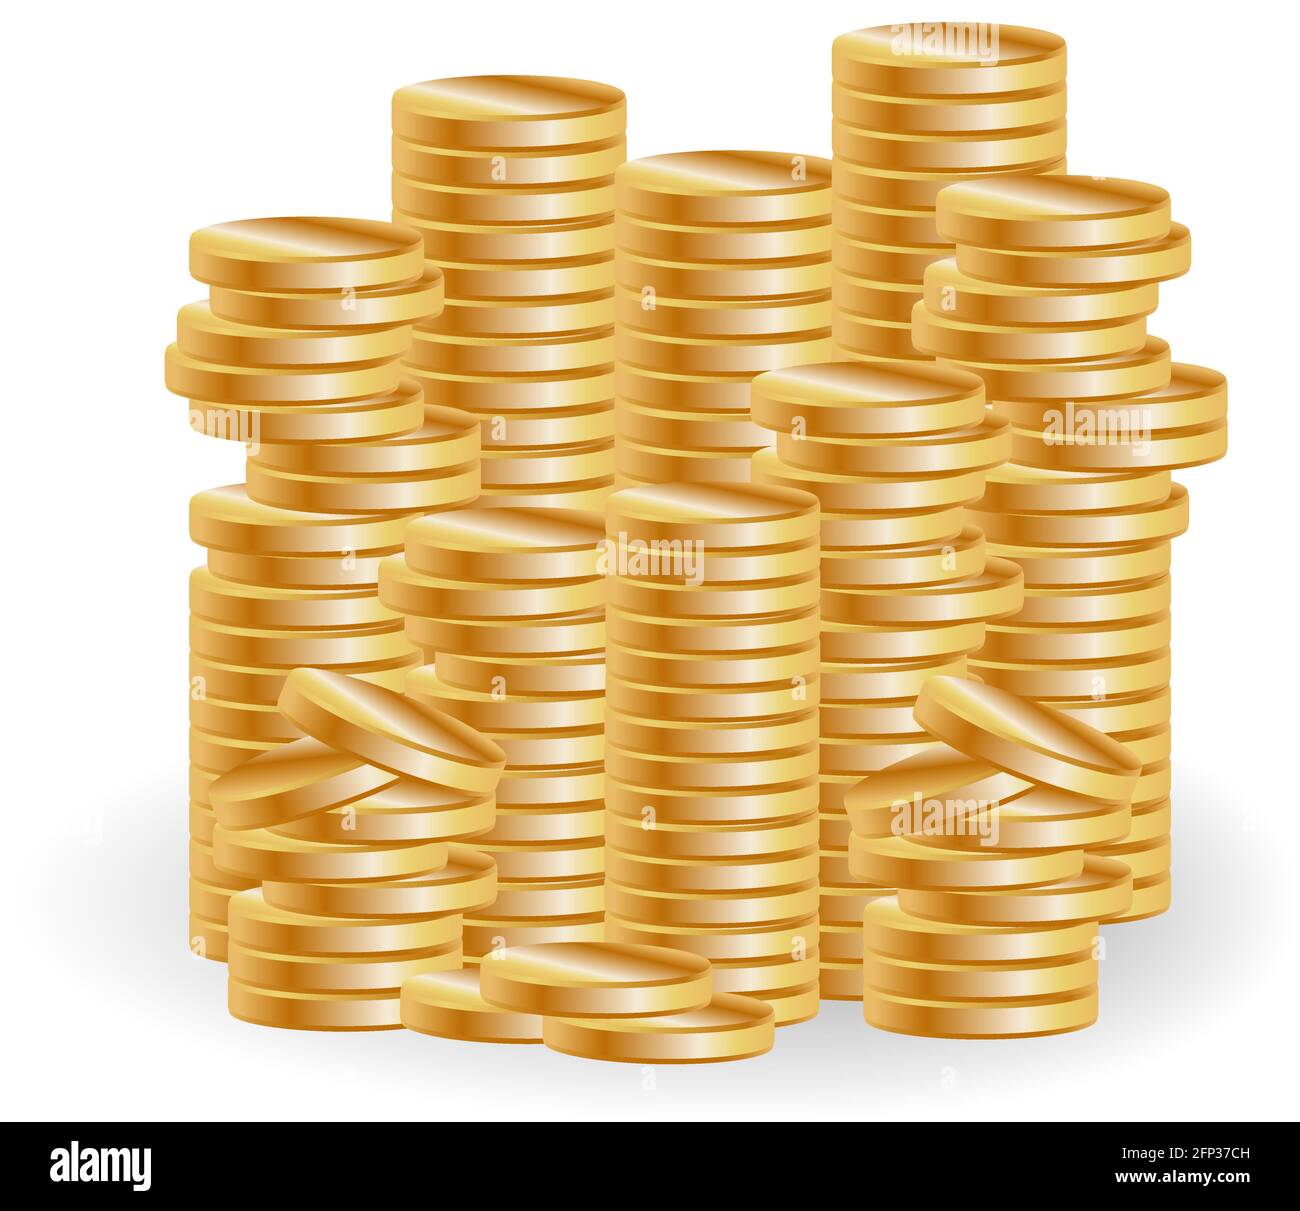 Stacks of gold coins Stock Photo by ©AlexisCorvus 1782228